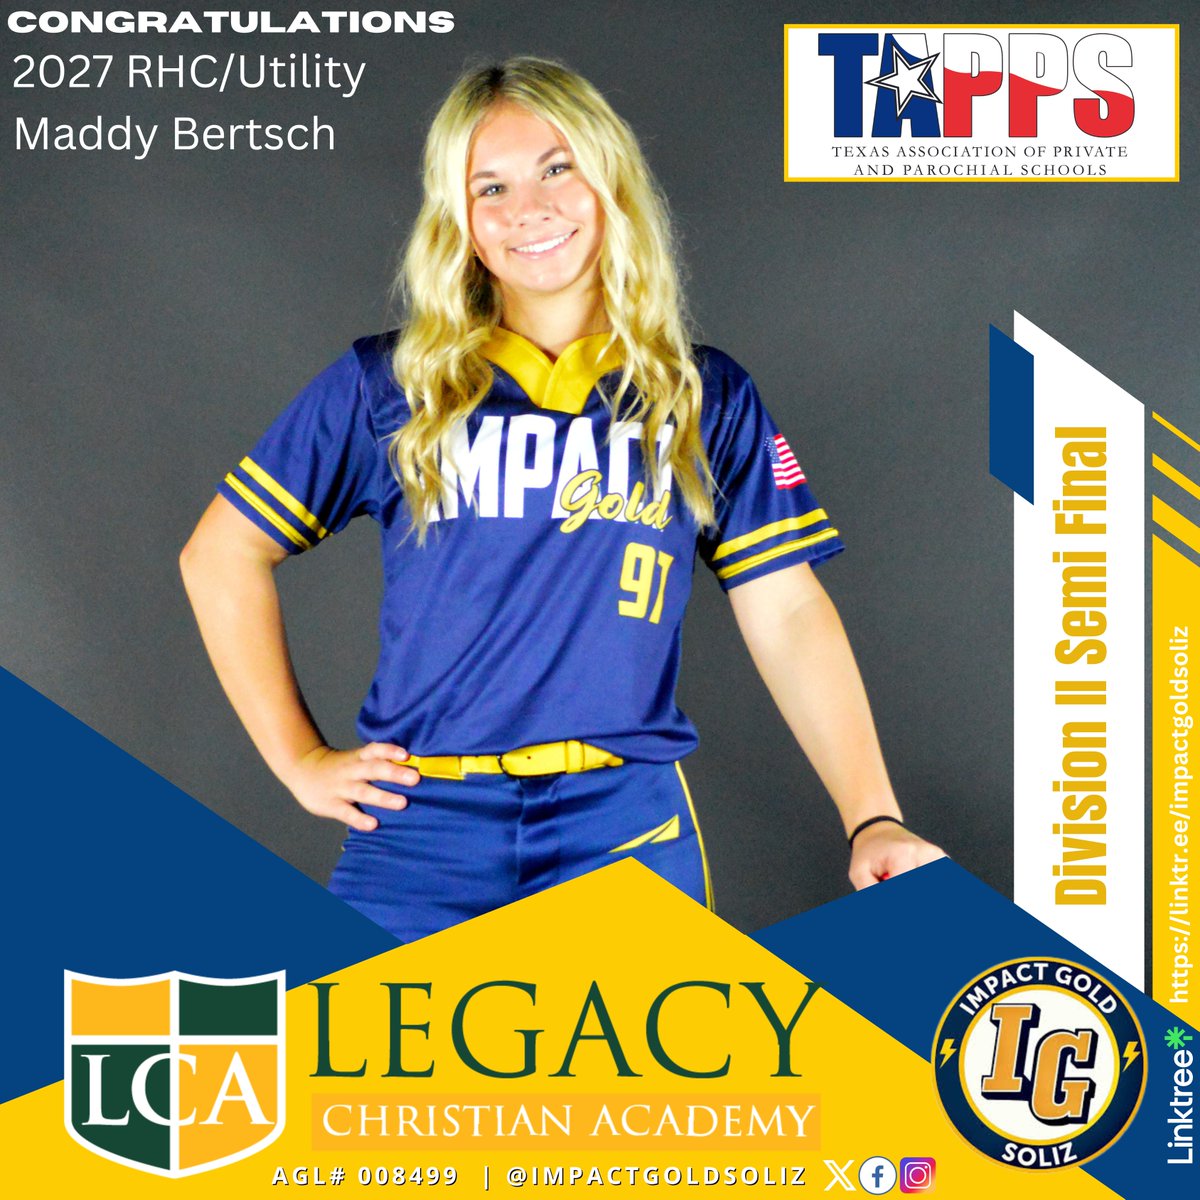 Congratulations to 2027 RHC/Utility Maddy Bertsch @MaddyBertsch27 and her Legacy Christian Academy HS for making the 2024 @TAPPSbiz State Tournament! She is the first of our Fantastic 9 that made playoffs to punch their 🎟️ #BeTheImpact #TrustTheProcess #GOLDBlooded